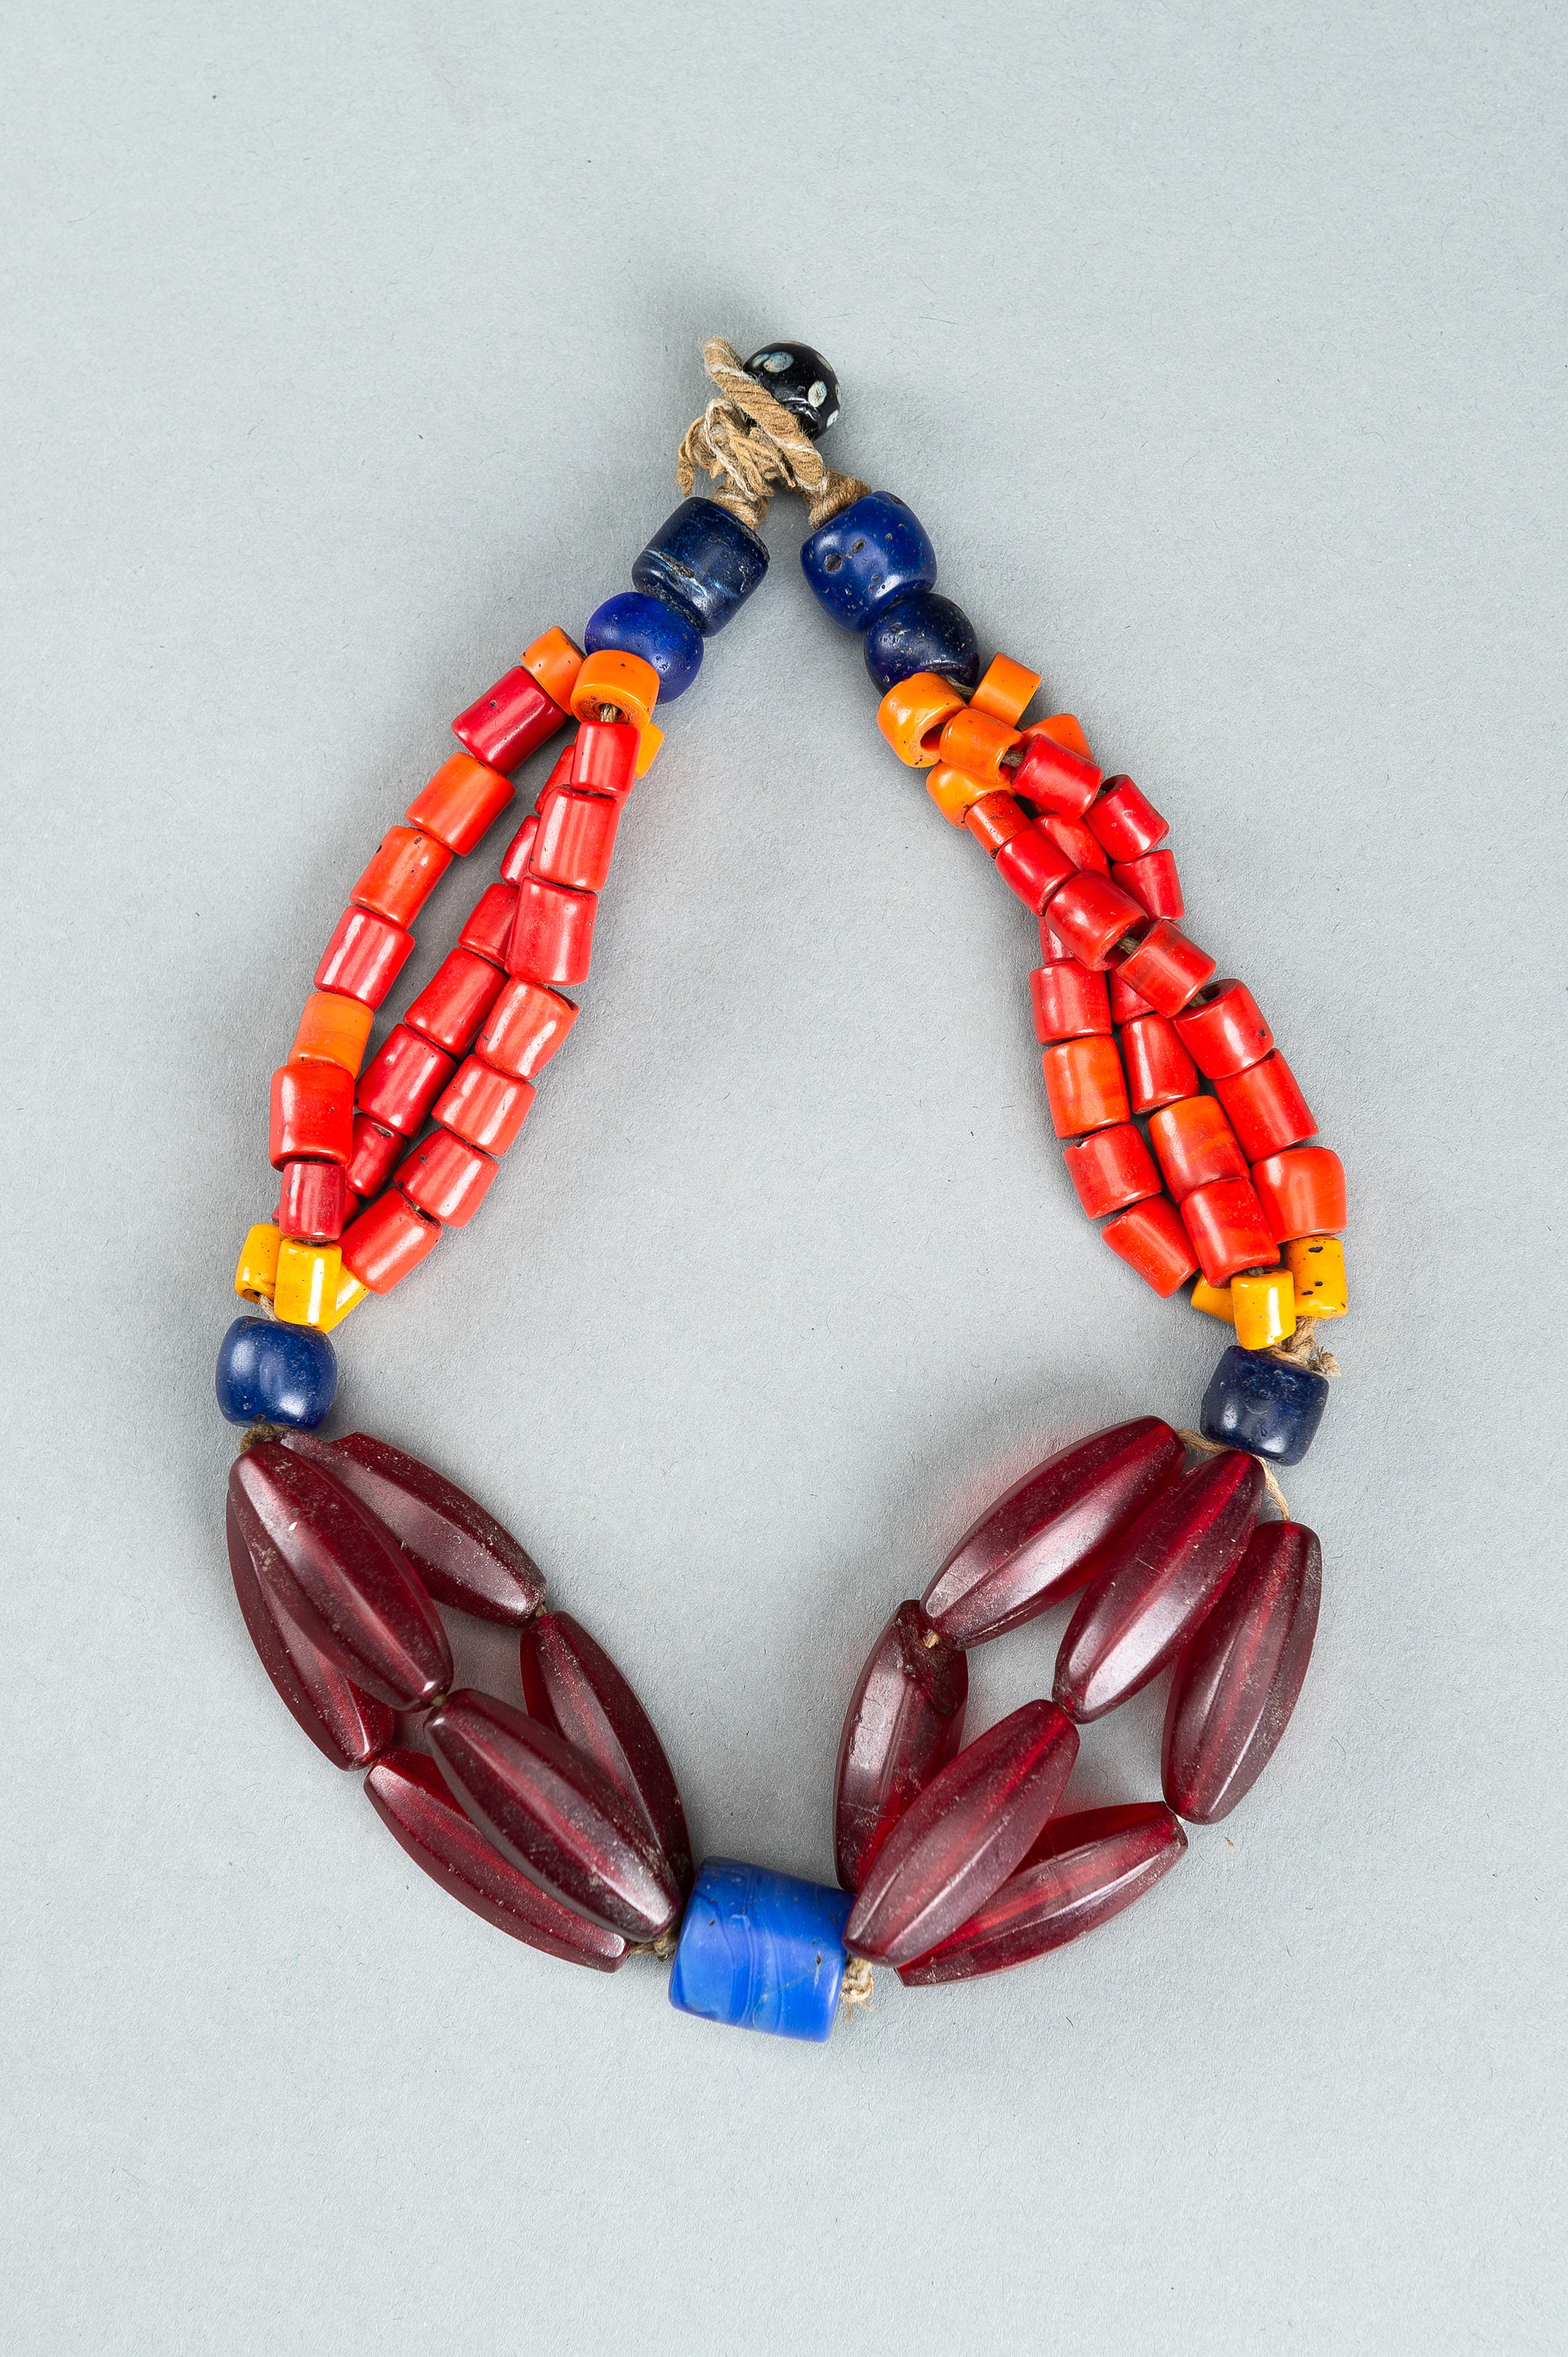 A NAGALAND MULTI-COLORED GLASS NECKLACE, c. 1900s - Image 8 of 9